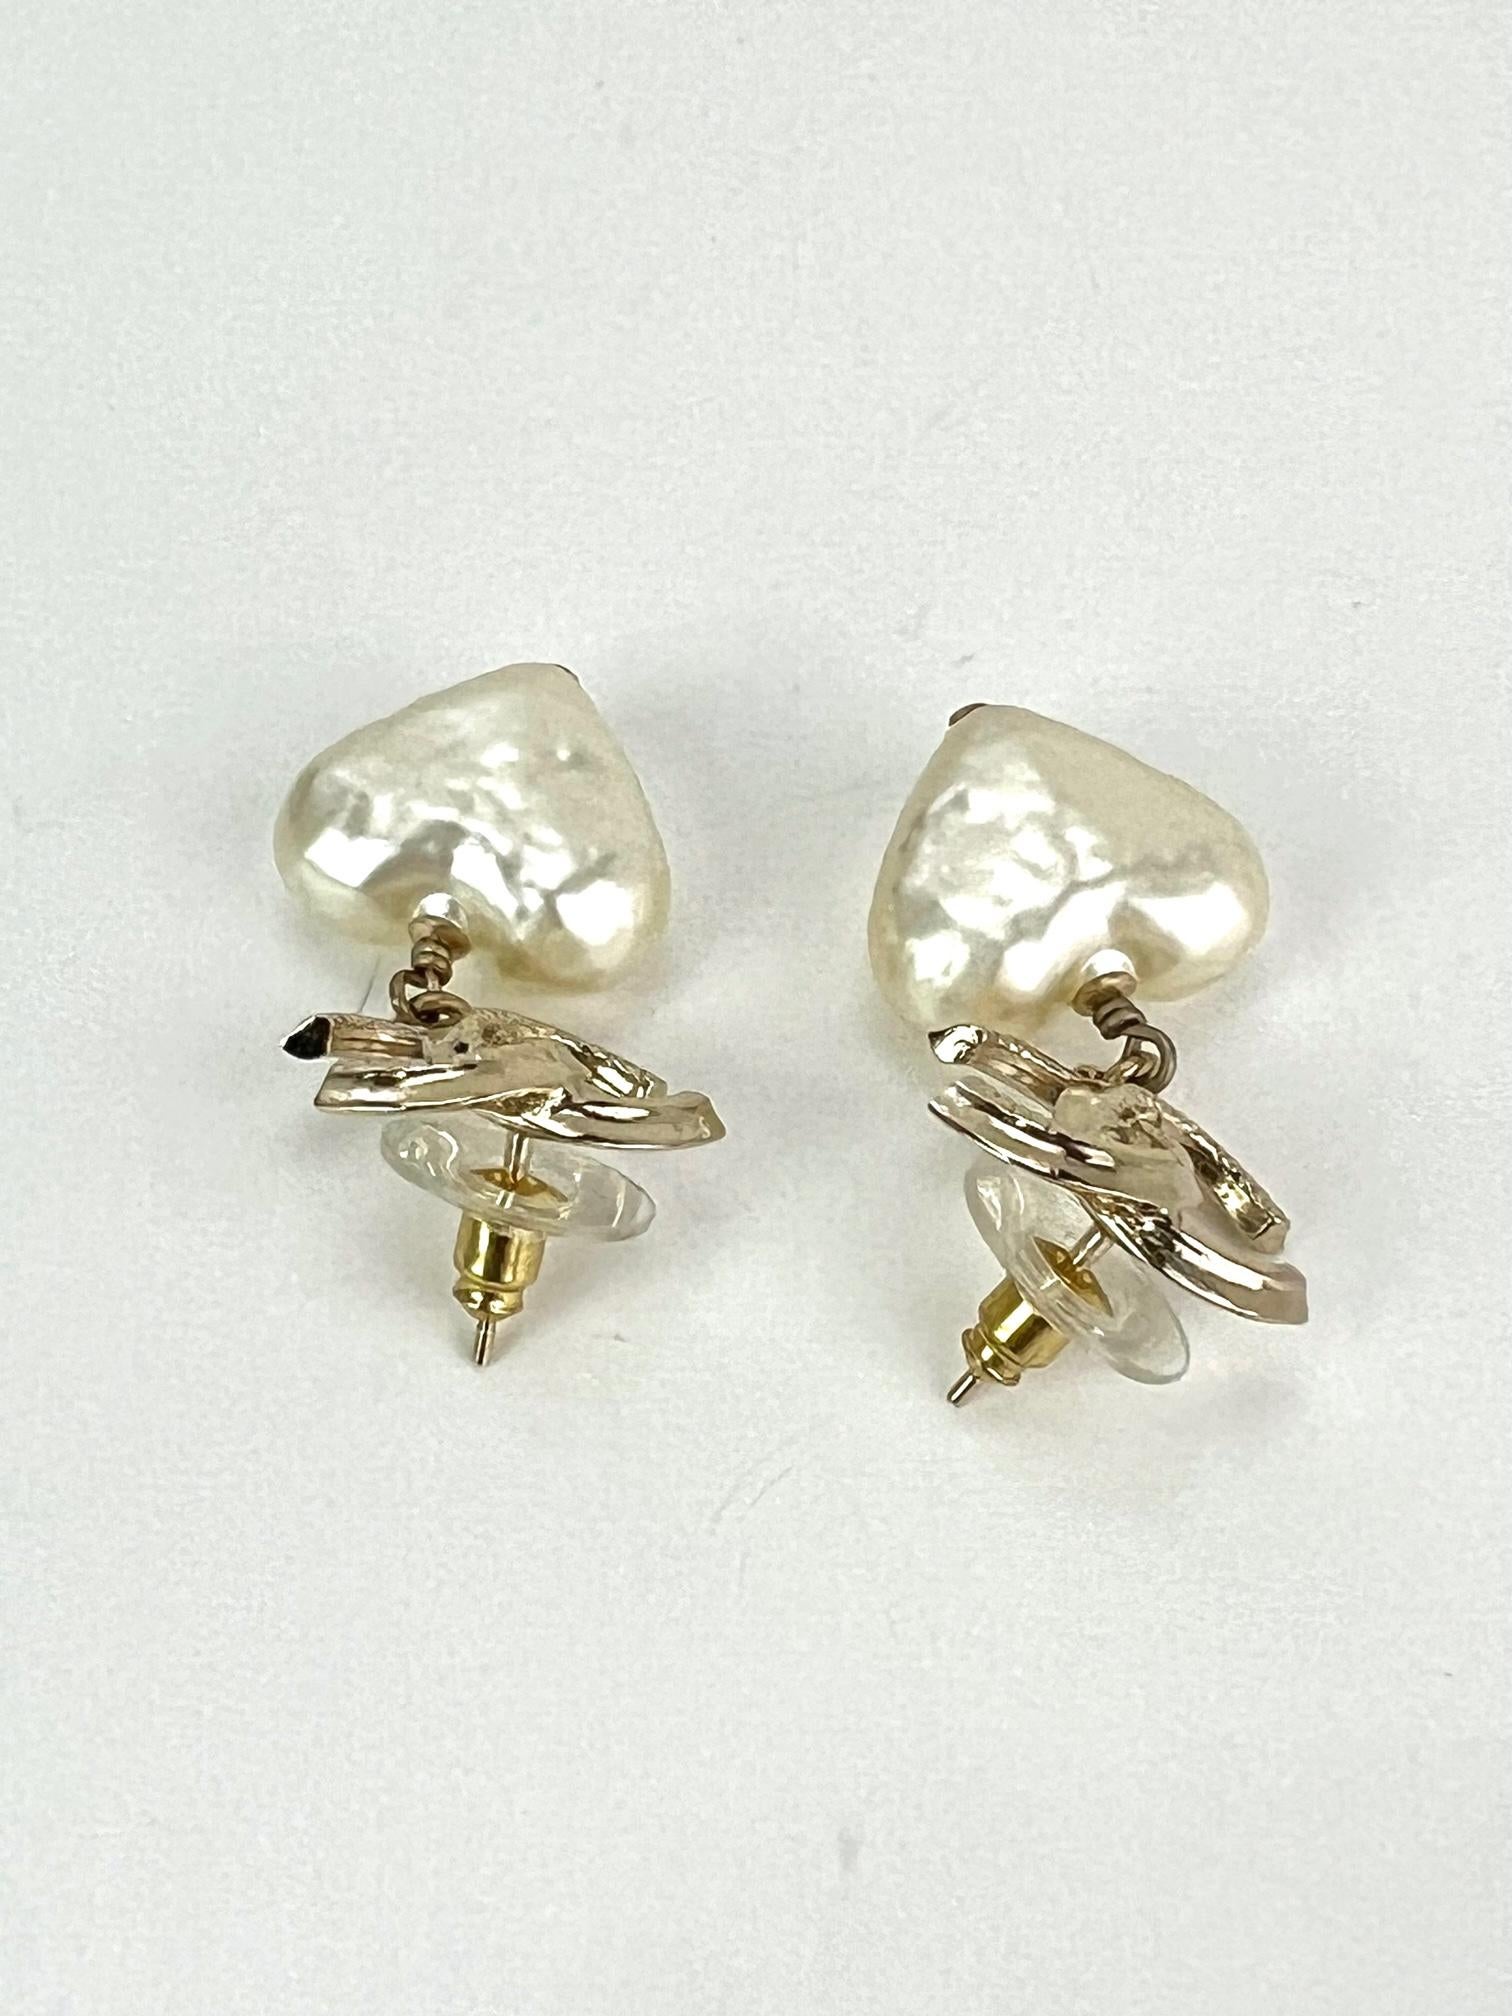 Pre-Owned 100% Authentic
CHANEL Pearl CC Heart Drop Earrings in Gold
RATING: A...excellent, near mint, only slight 
signs of wear
MATERIAL:  pearl hearts, metal
MEASUREMENTS: H 1.75'' x W .75''
BACKS: has plastic ring on backs for easier